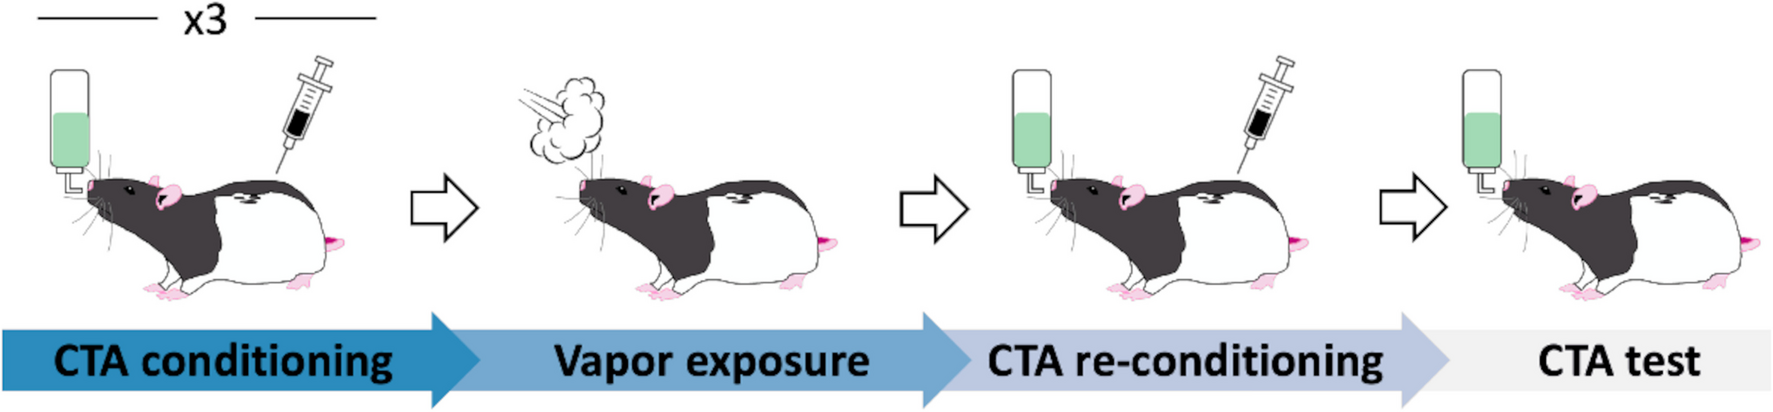 Attenuated incubation of ethanol-induced conditioned taste aversion in a model of dependence